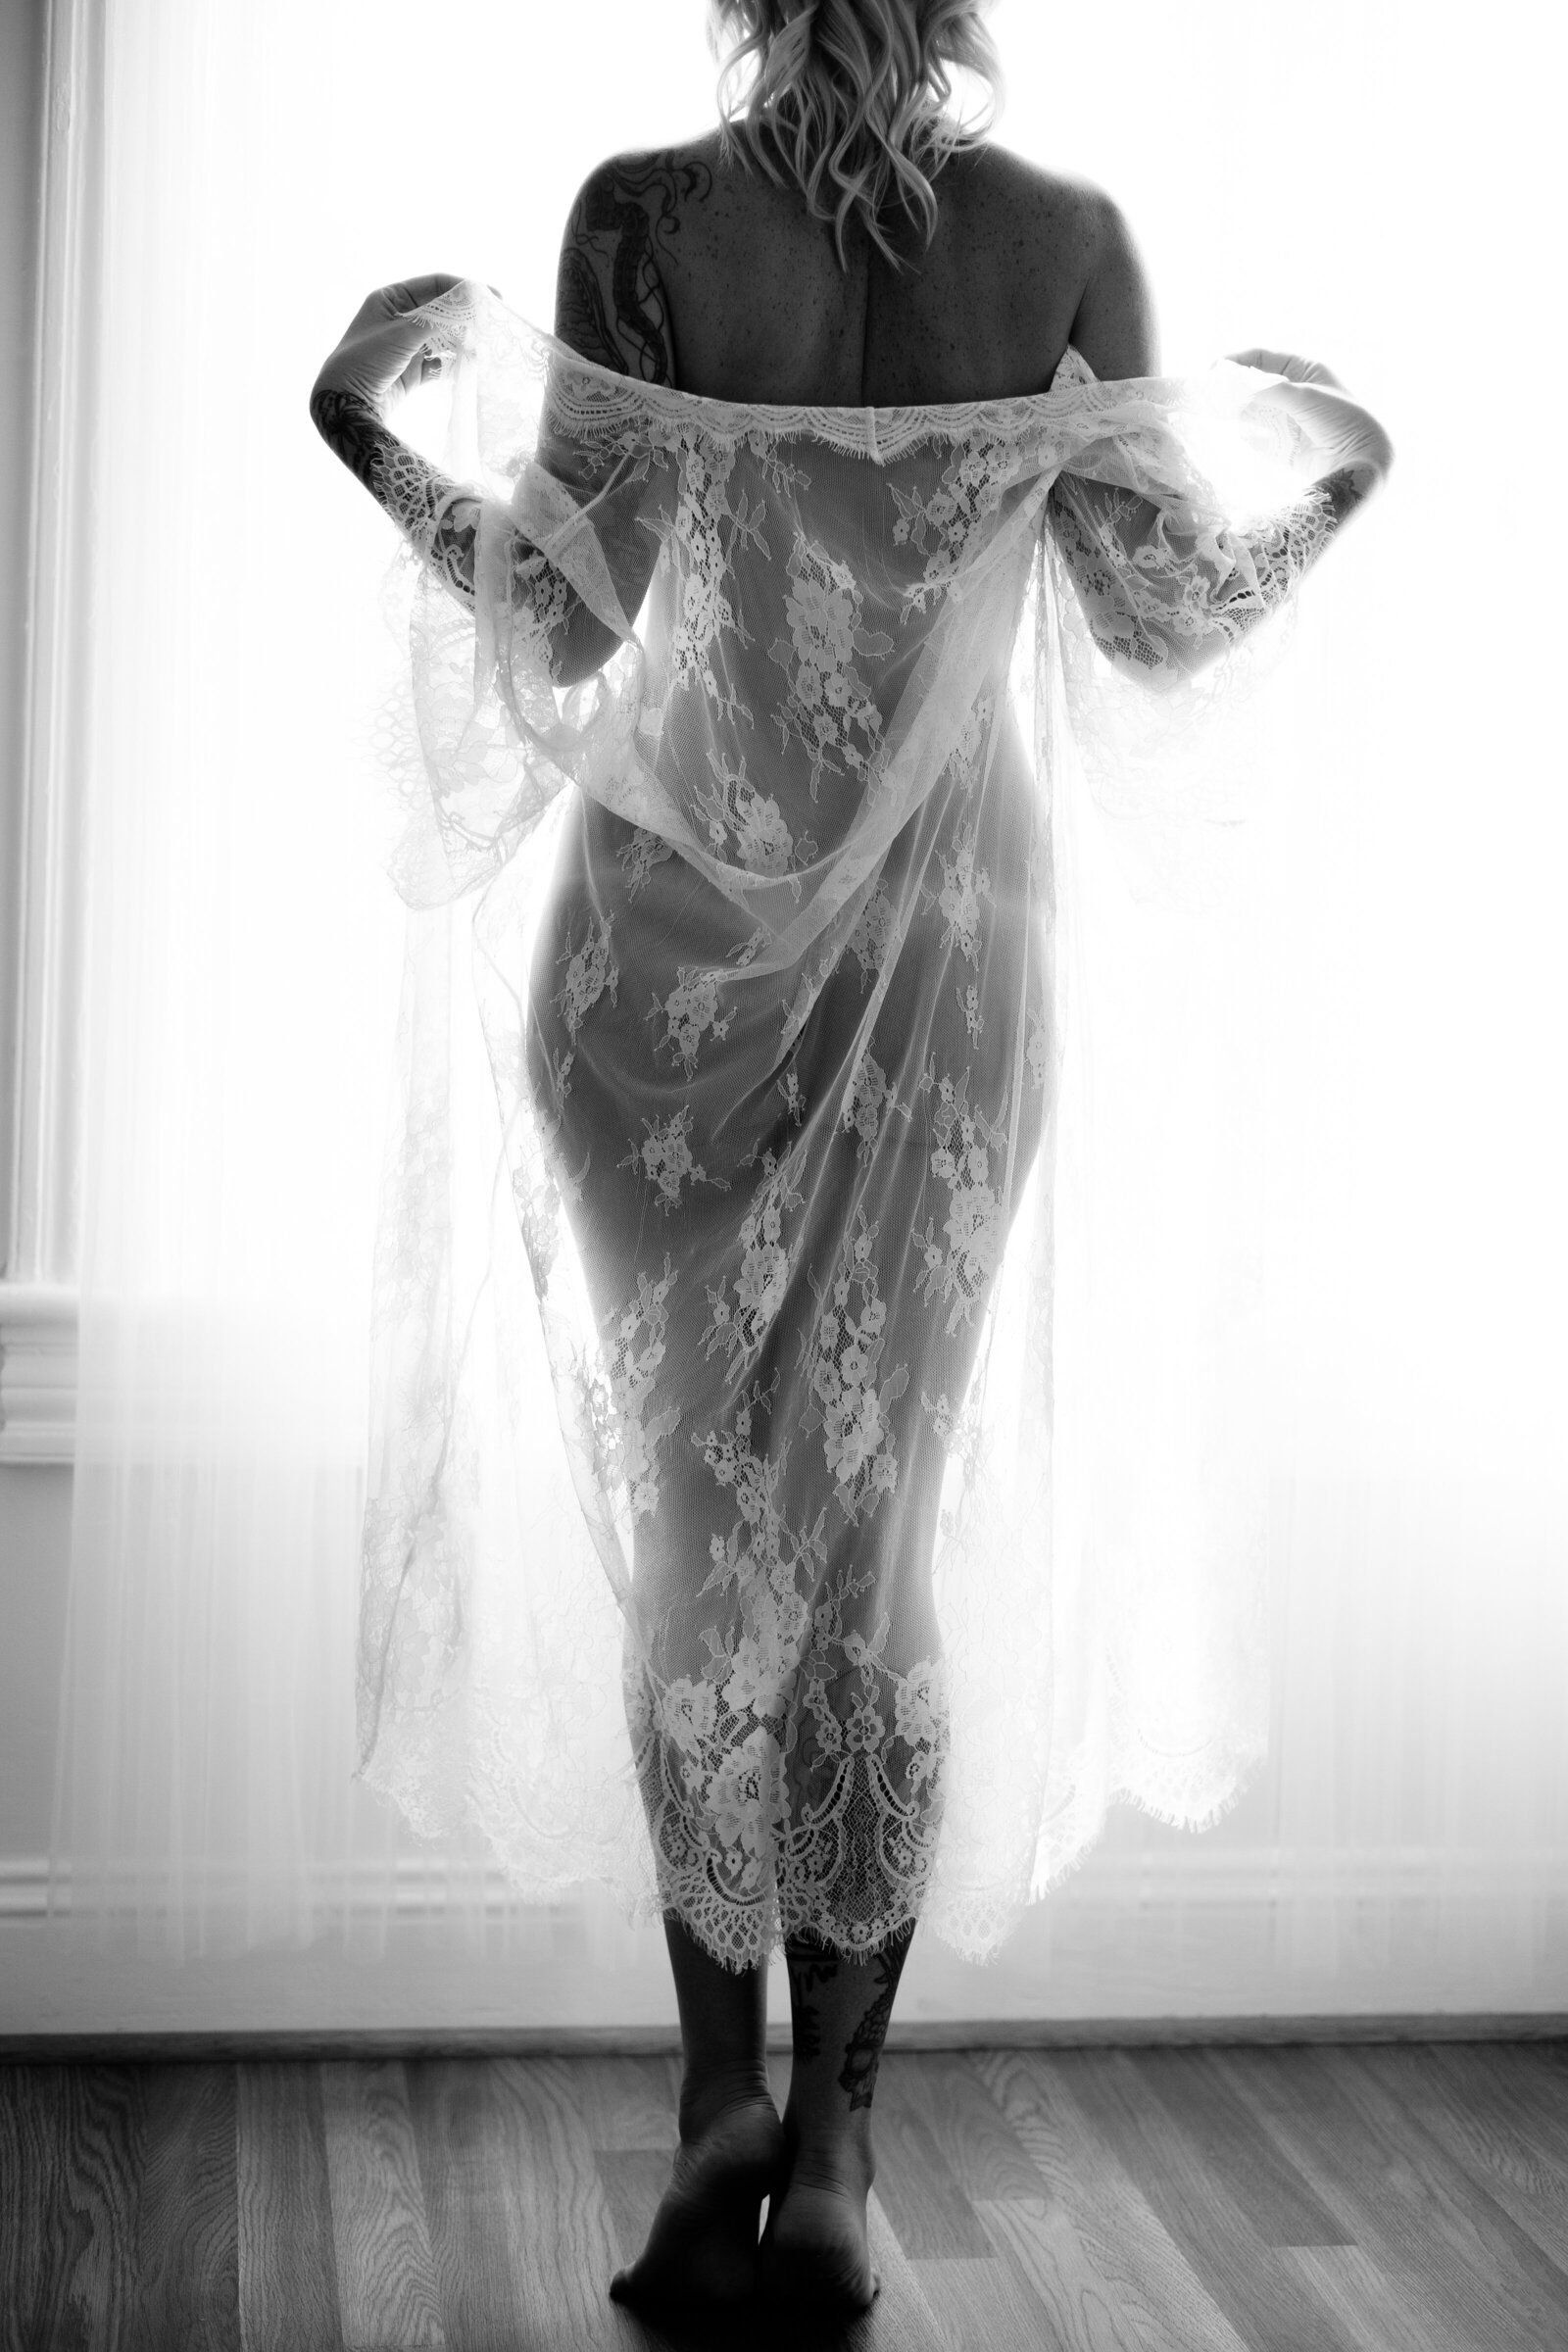 Black and white boudoir photo of woman wearing lacylingerie